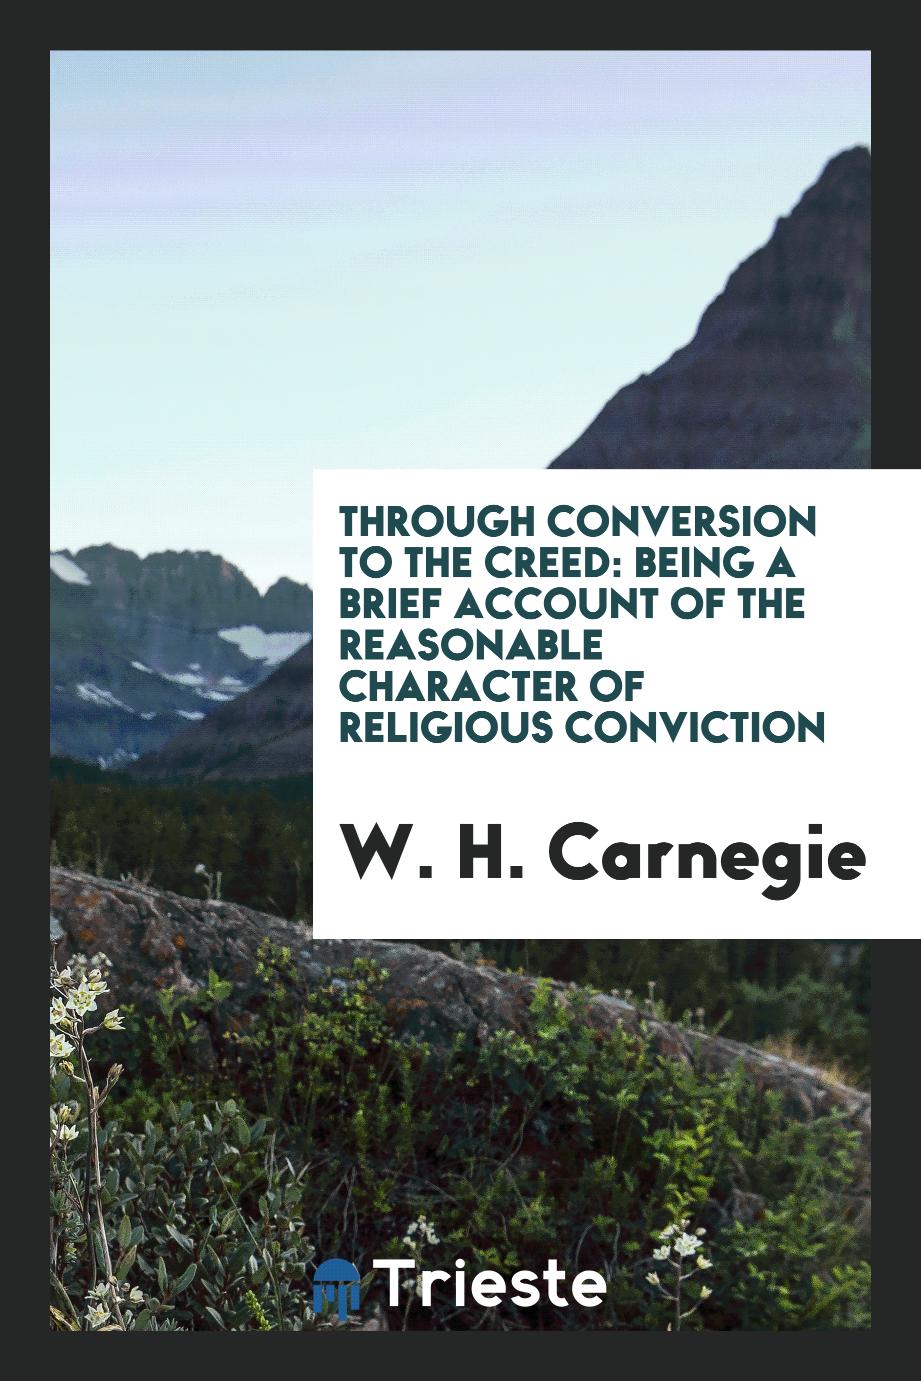 Through Conversion to the Creed: Being a Brief Account of the Reasonable Character of Religious Conviction